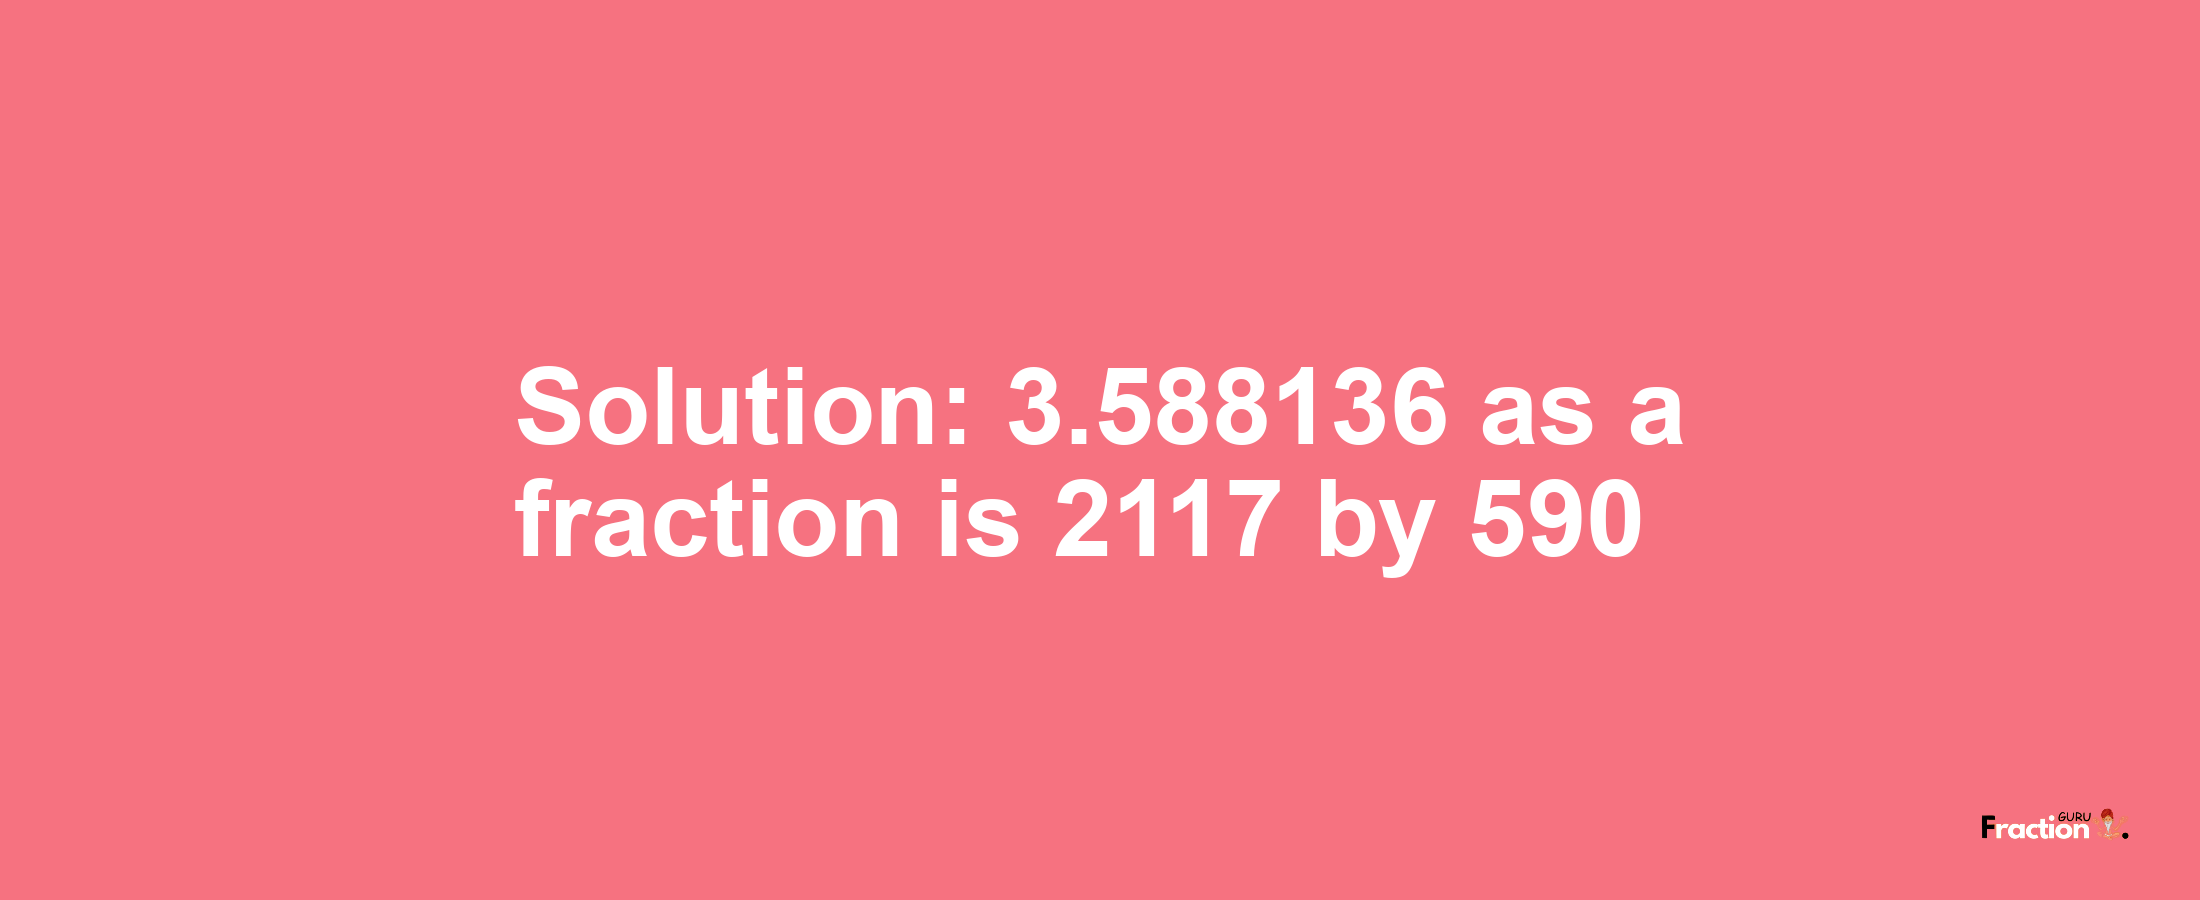 Solution:3.588136 as a fraction is 2117/590